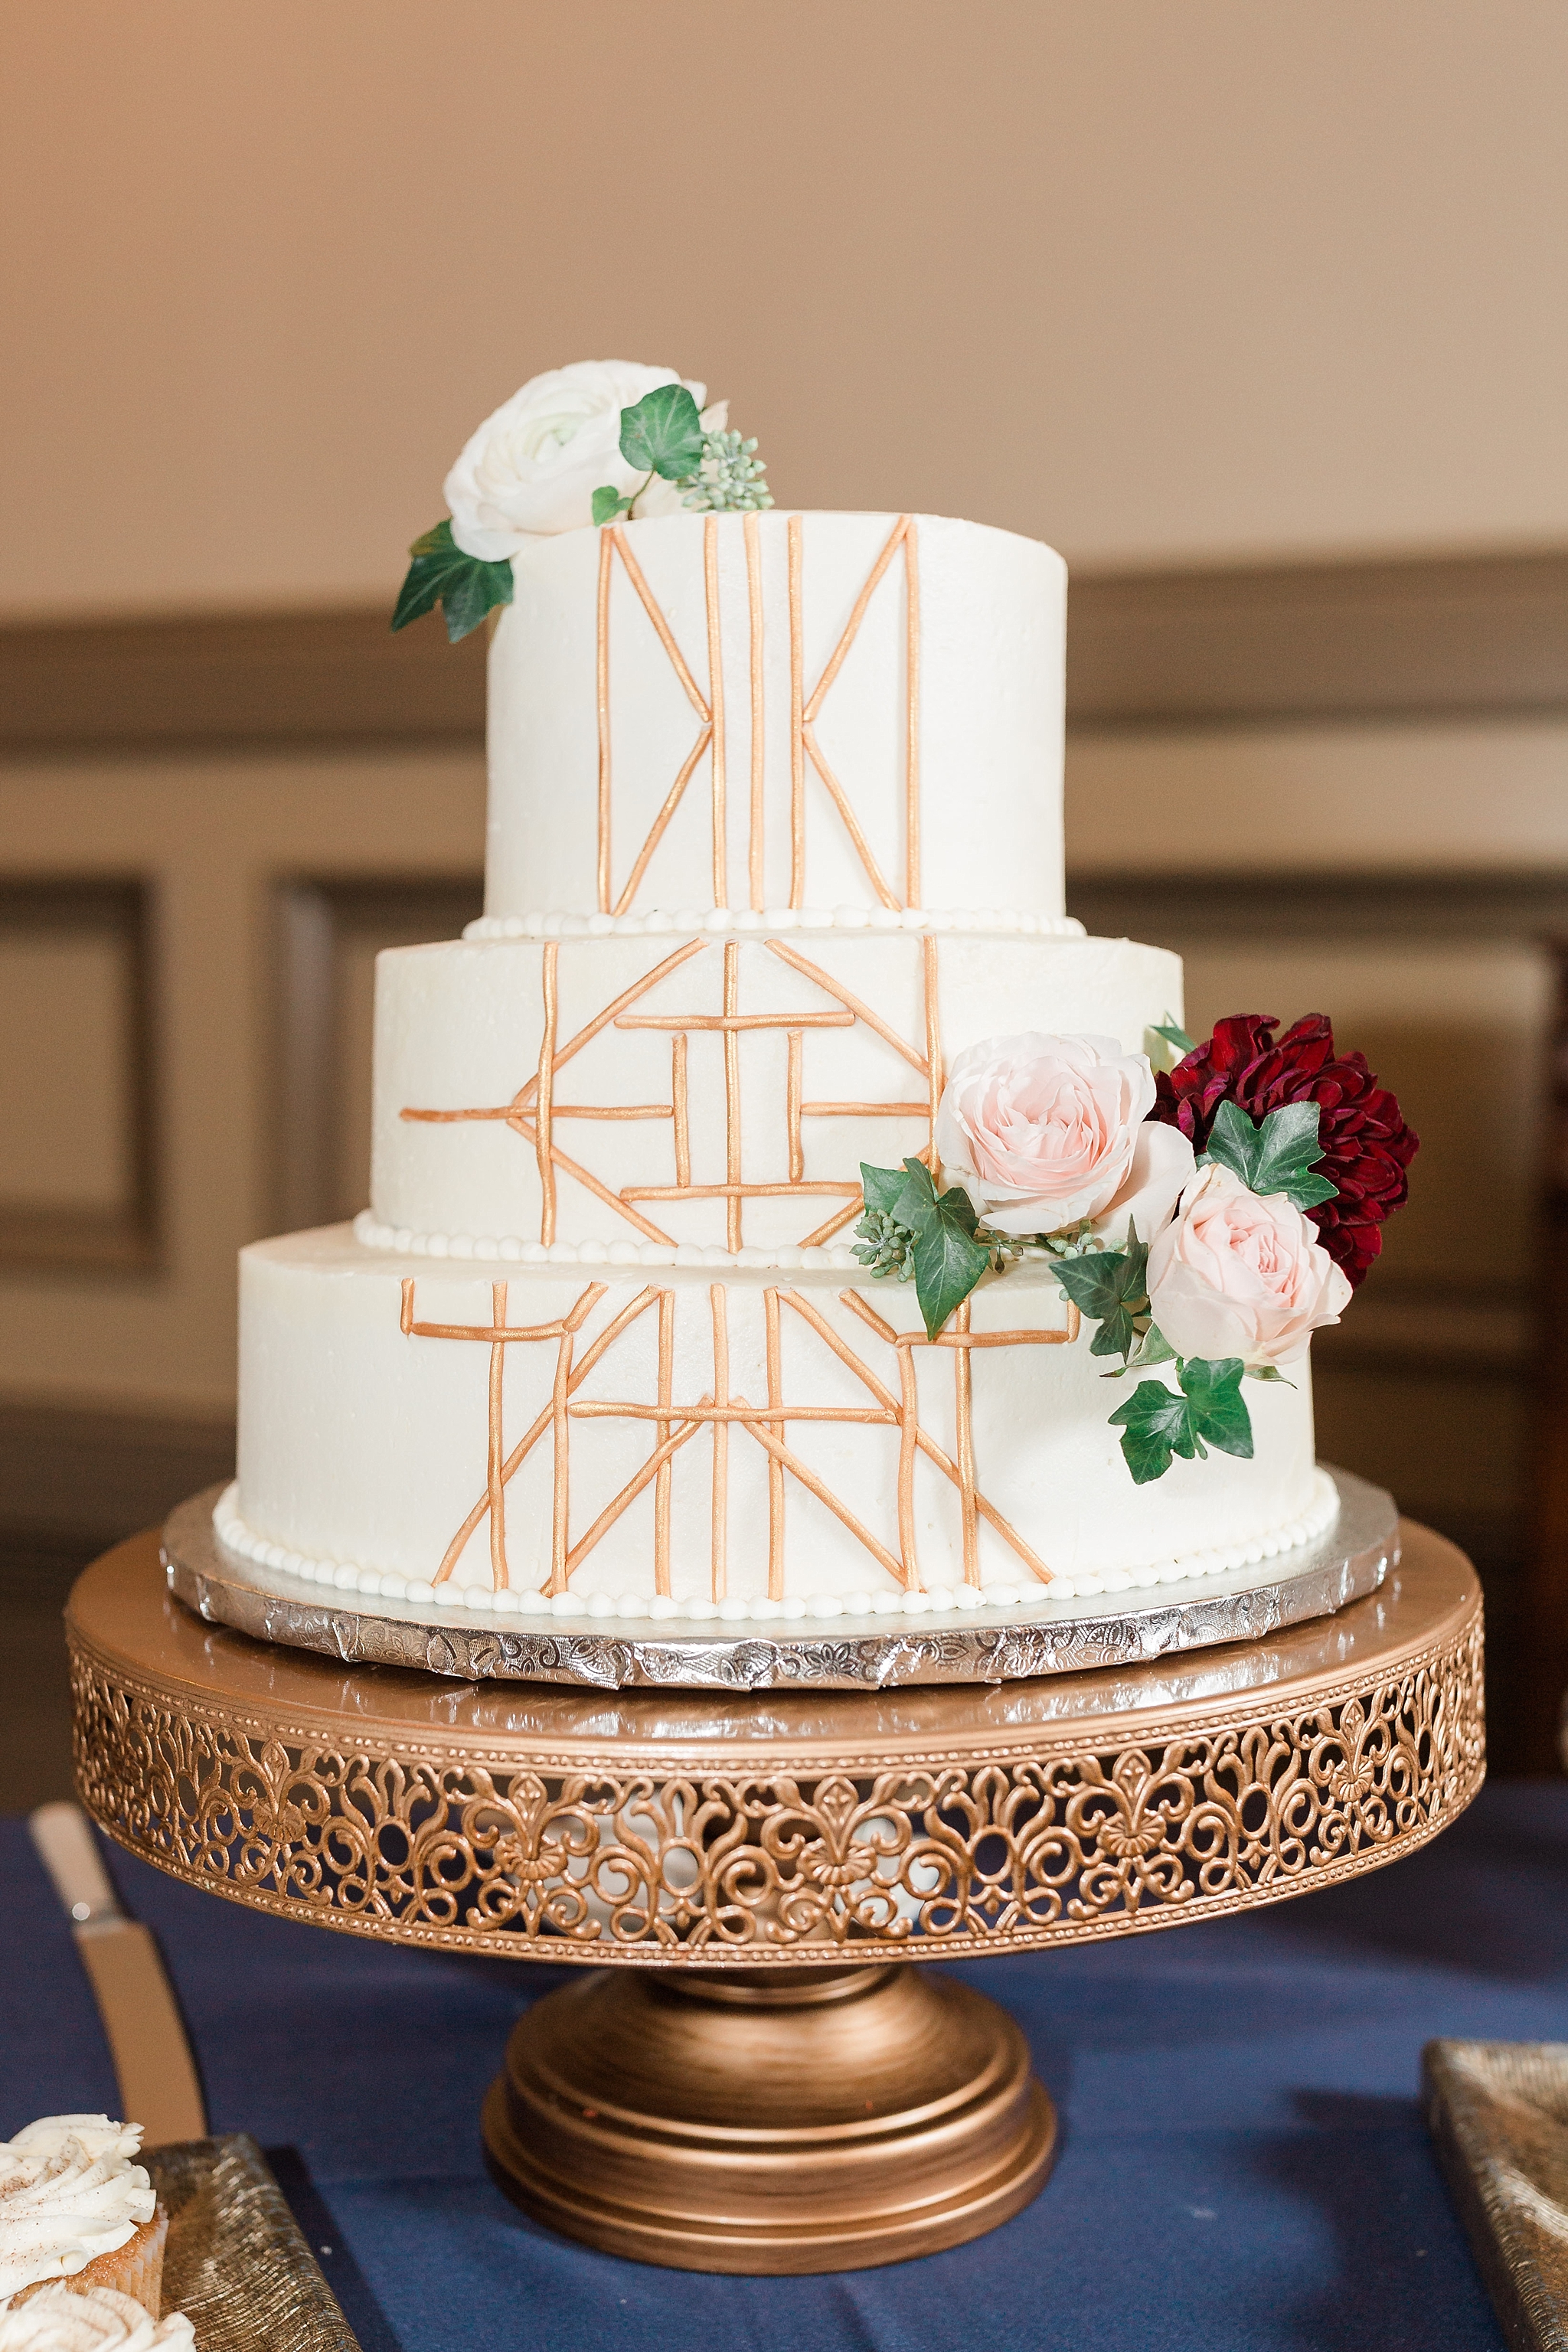 These September "I do's" took place during an art-deco inspired wedding at the John Marshall Ballrooms in Richmond, VA. 